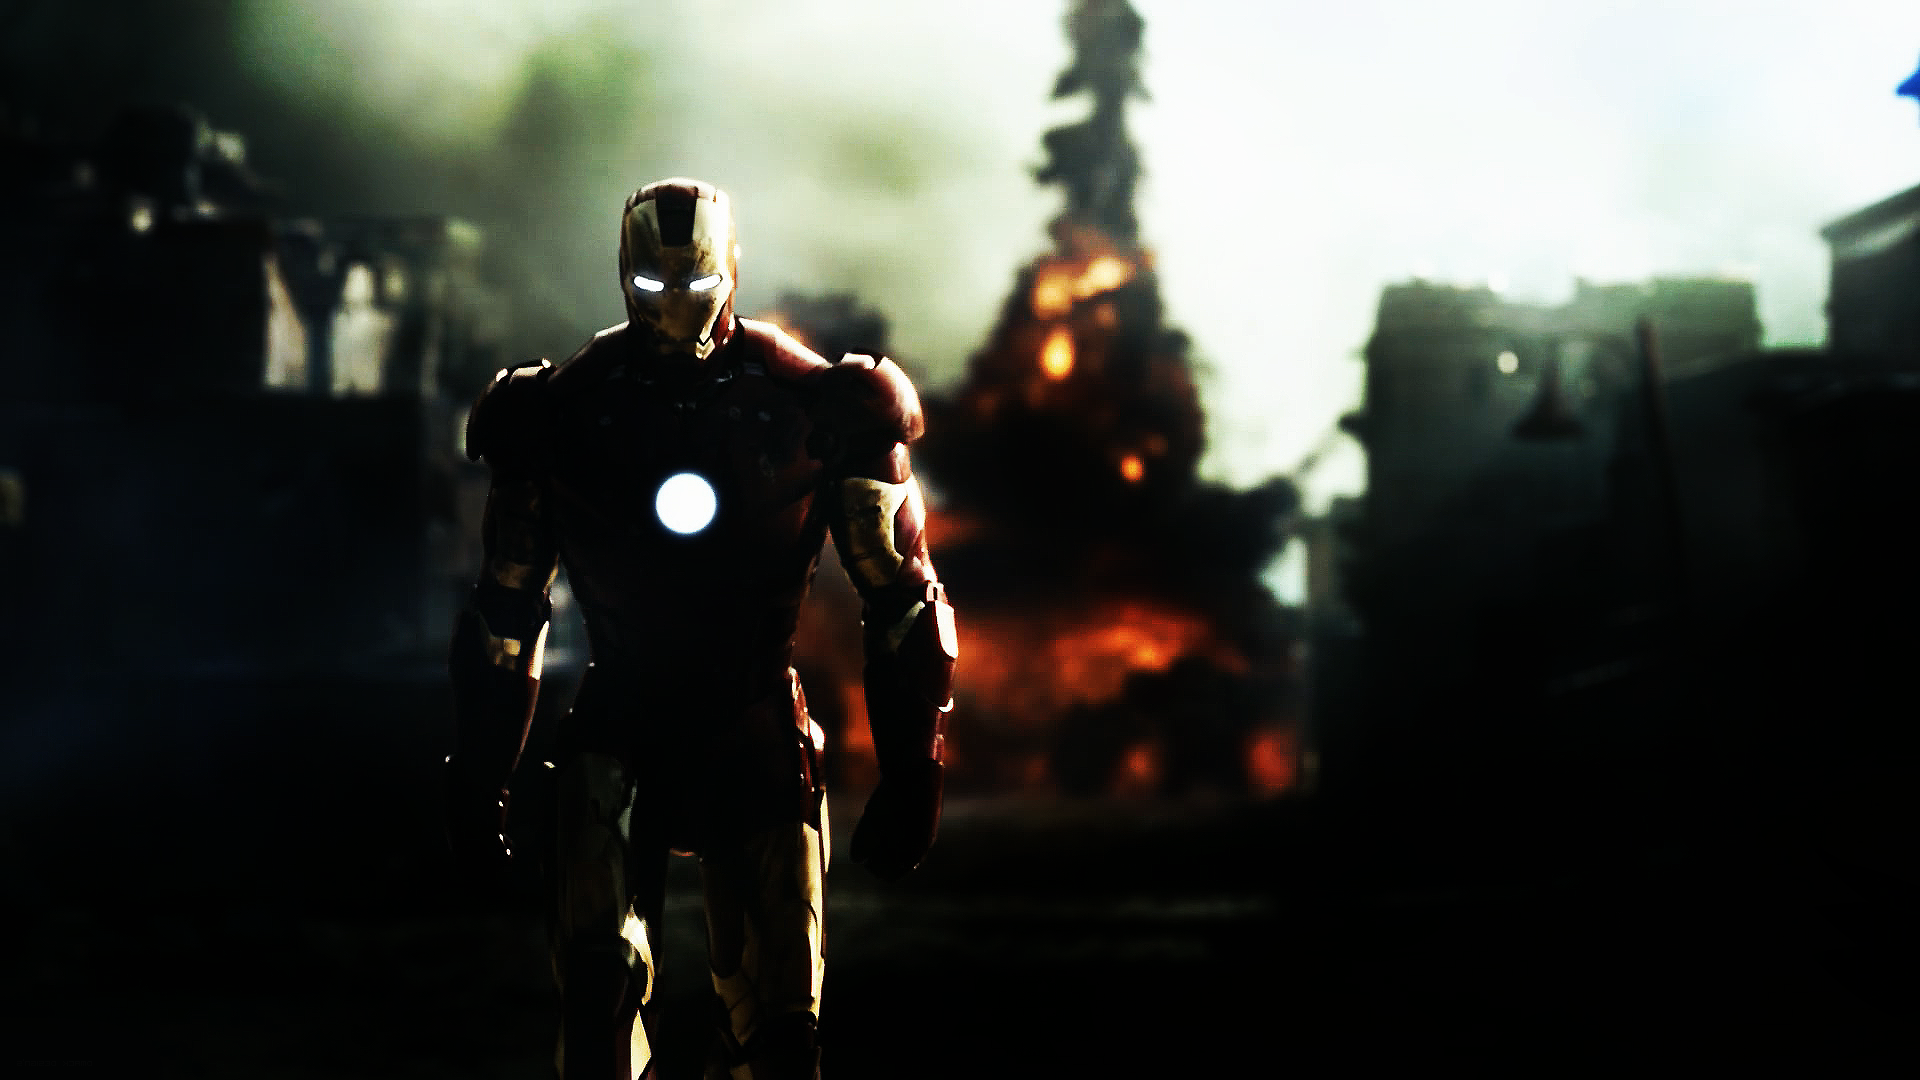 Download Ironman Wallpaper For Android #xoxbz » hdxwallpaperz.com